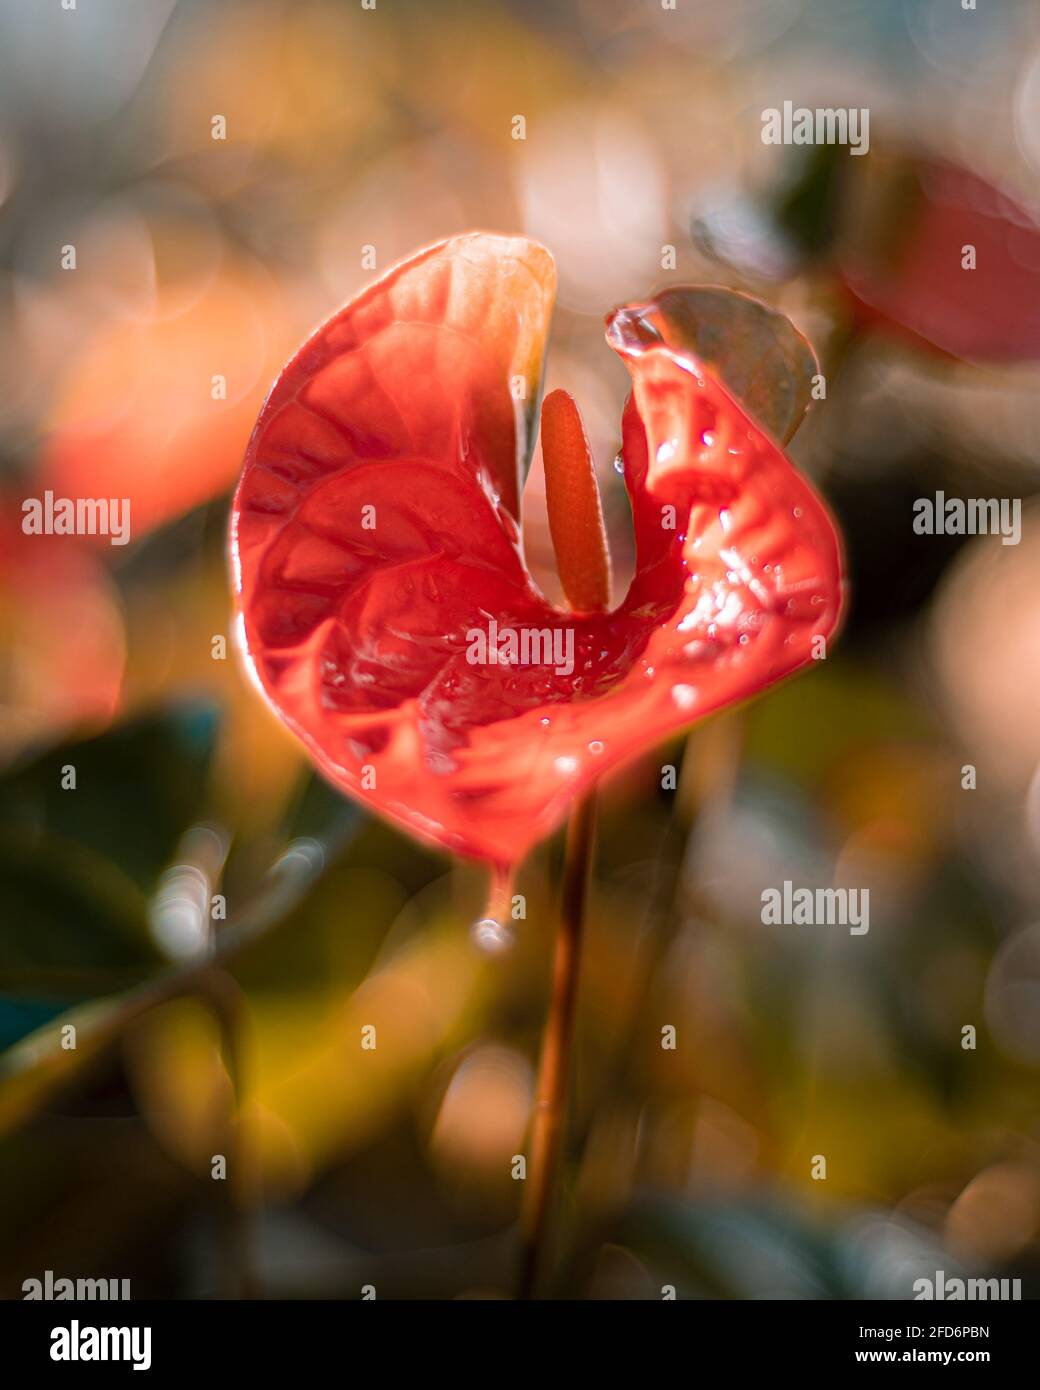 Anthurium flower in isolated close up glowing dew in the morning natural light in the garden. Stock Photo